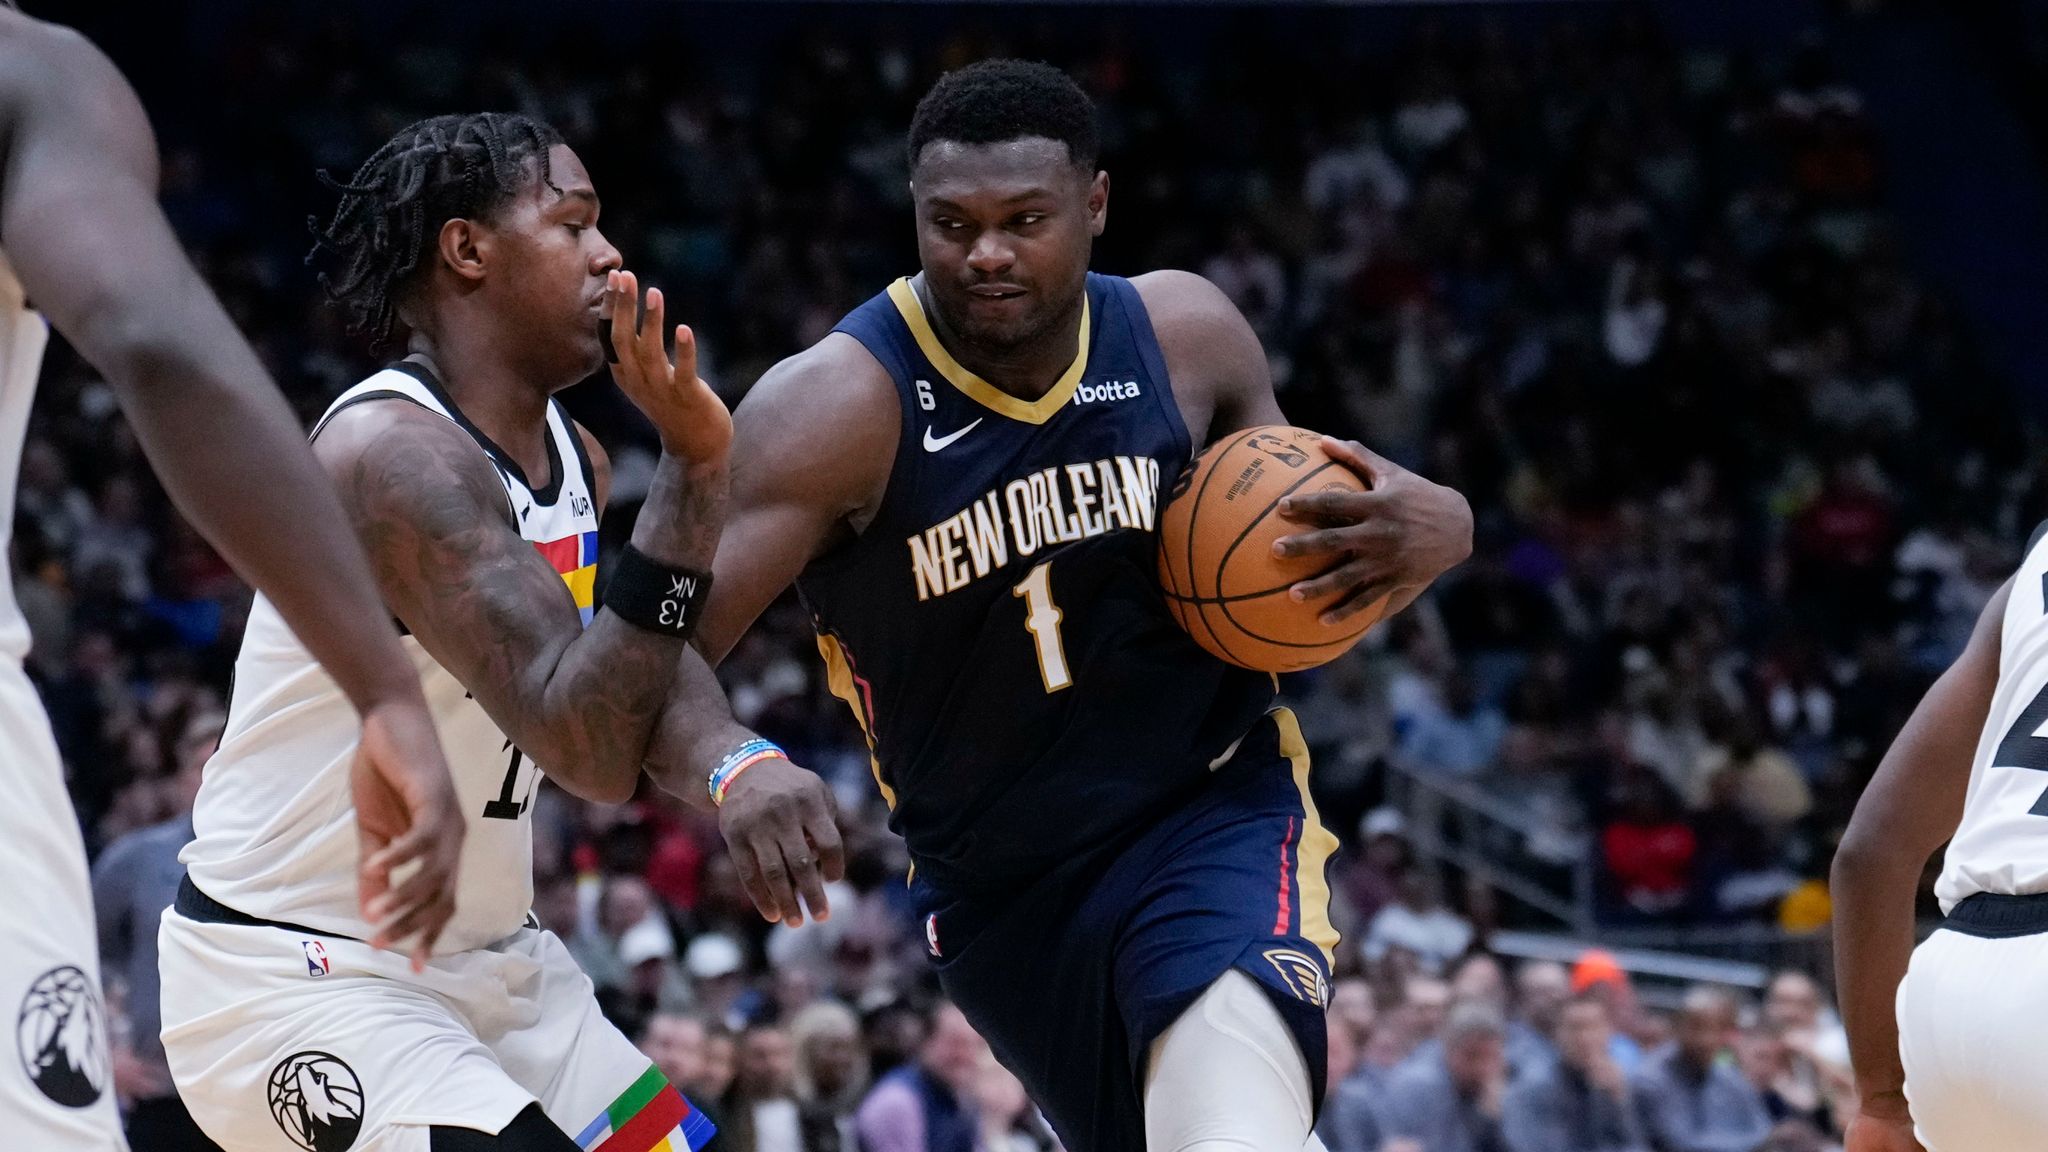 Zion Williamson to sit out Pelicans' next 3 games, miss All-Star Game,  report says